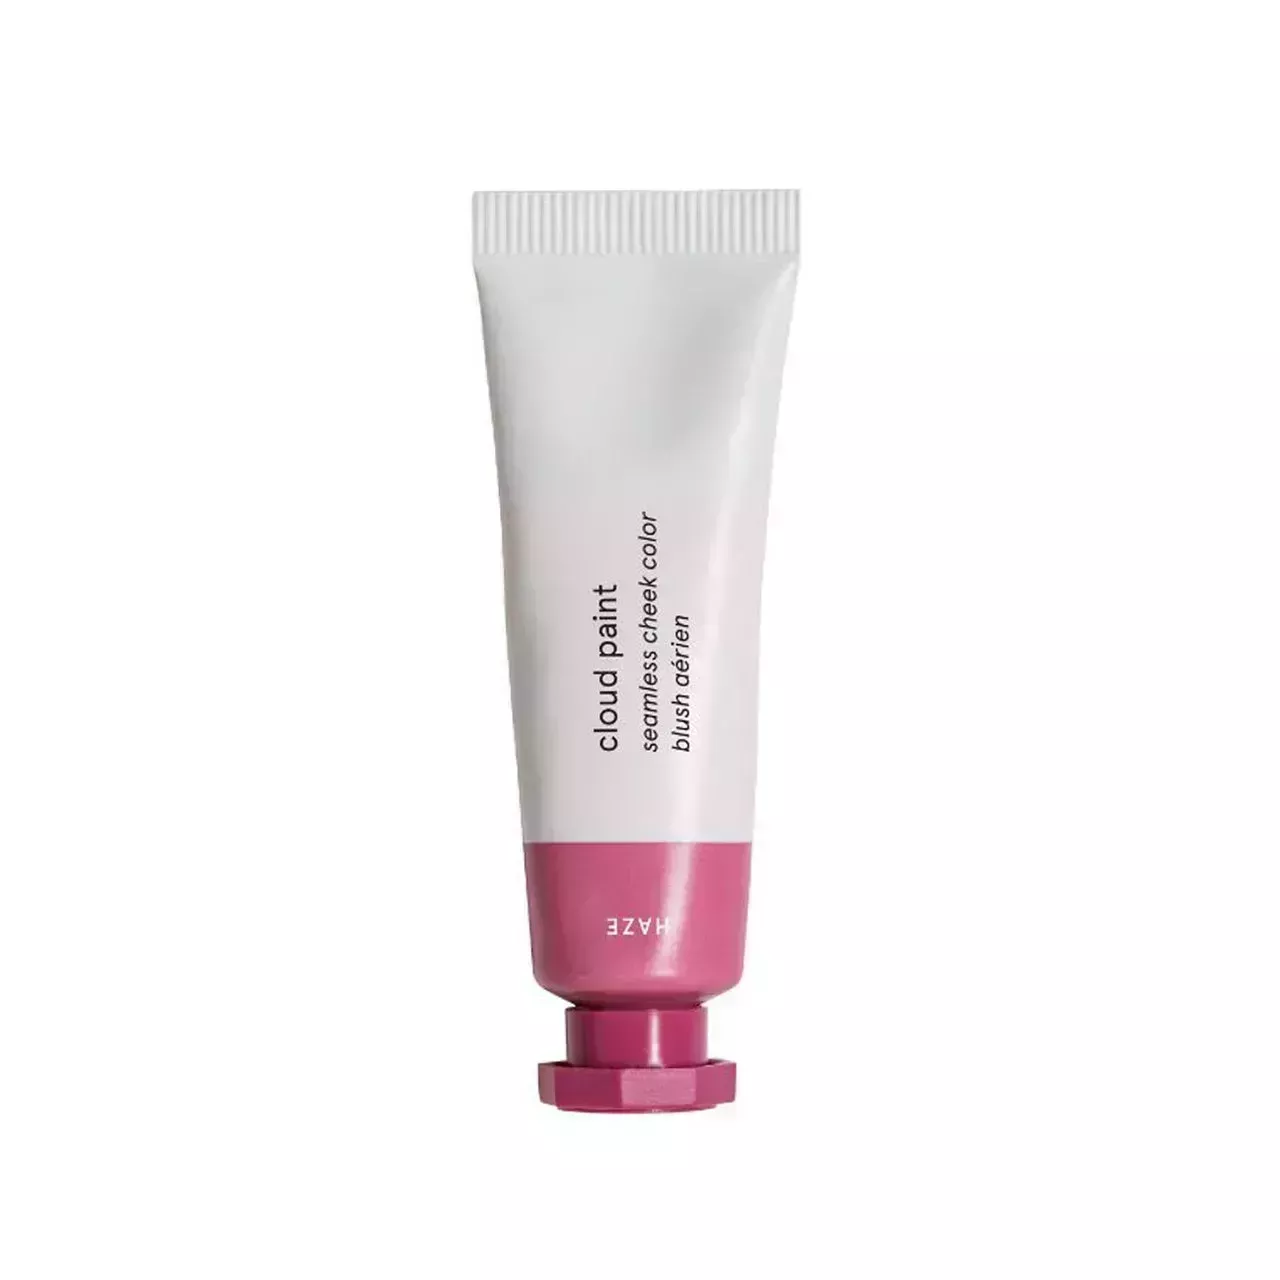 Glossier Cloud Paint white tube with pink stripe and cap on white background